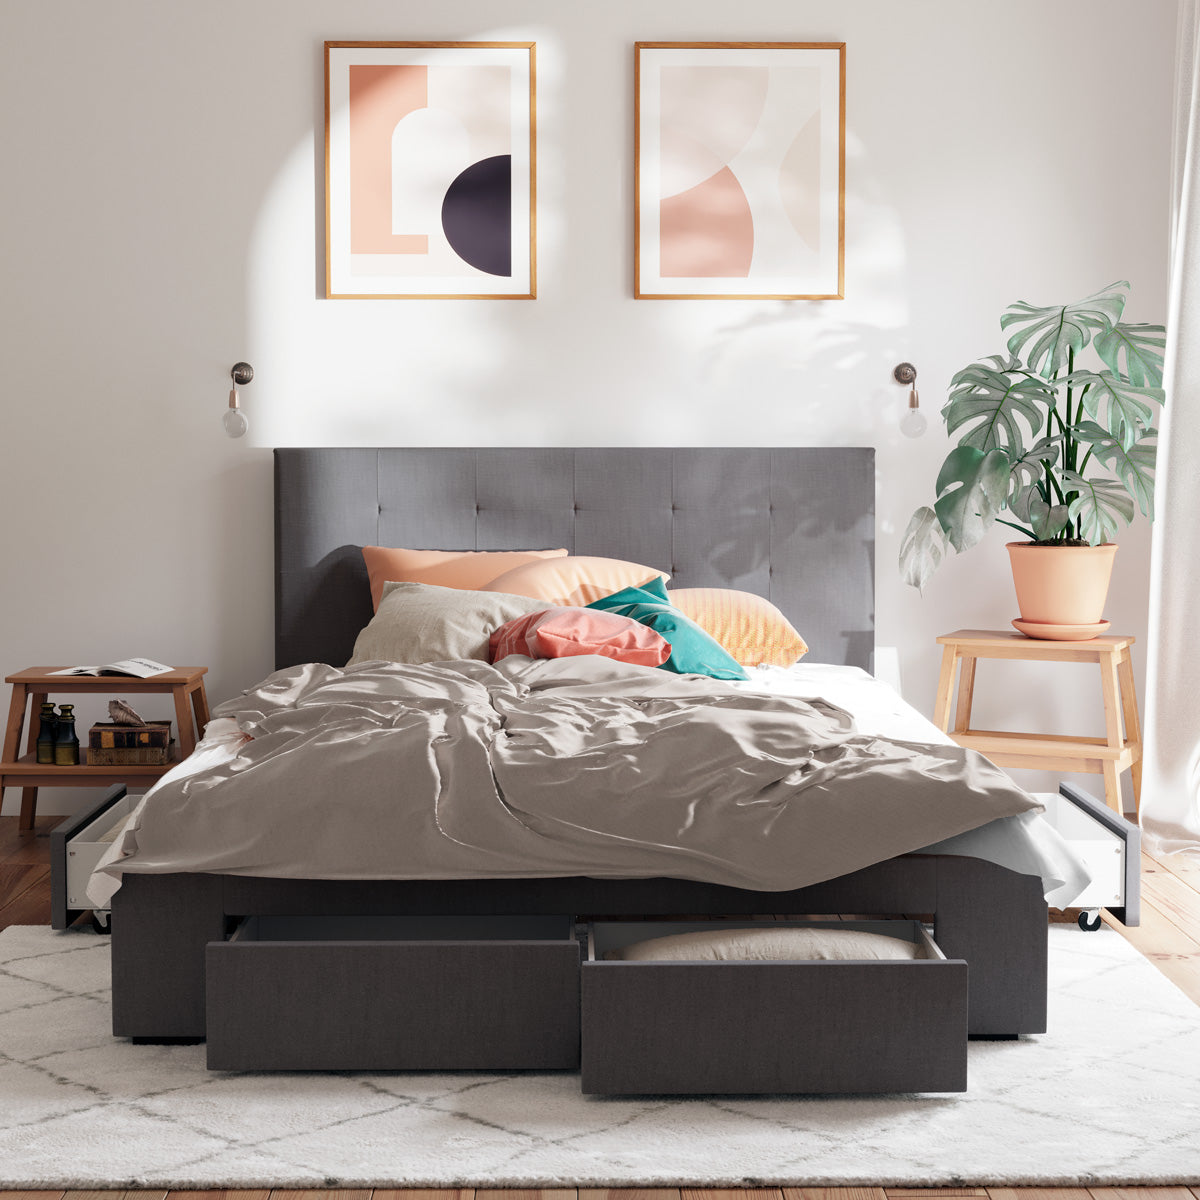 Charcoal Audrey Storage Bed Frame with Aspen Bedside Tables Package